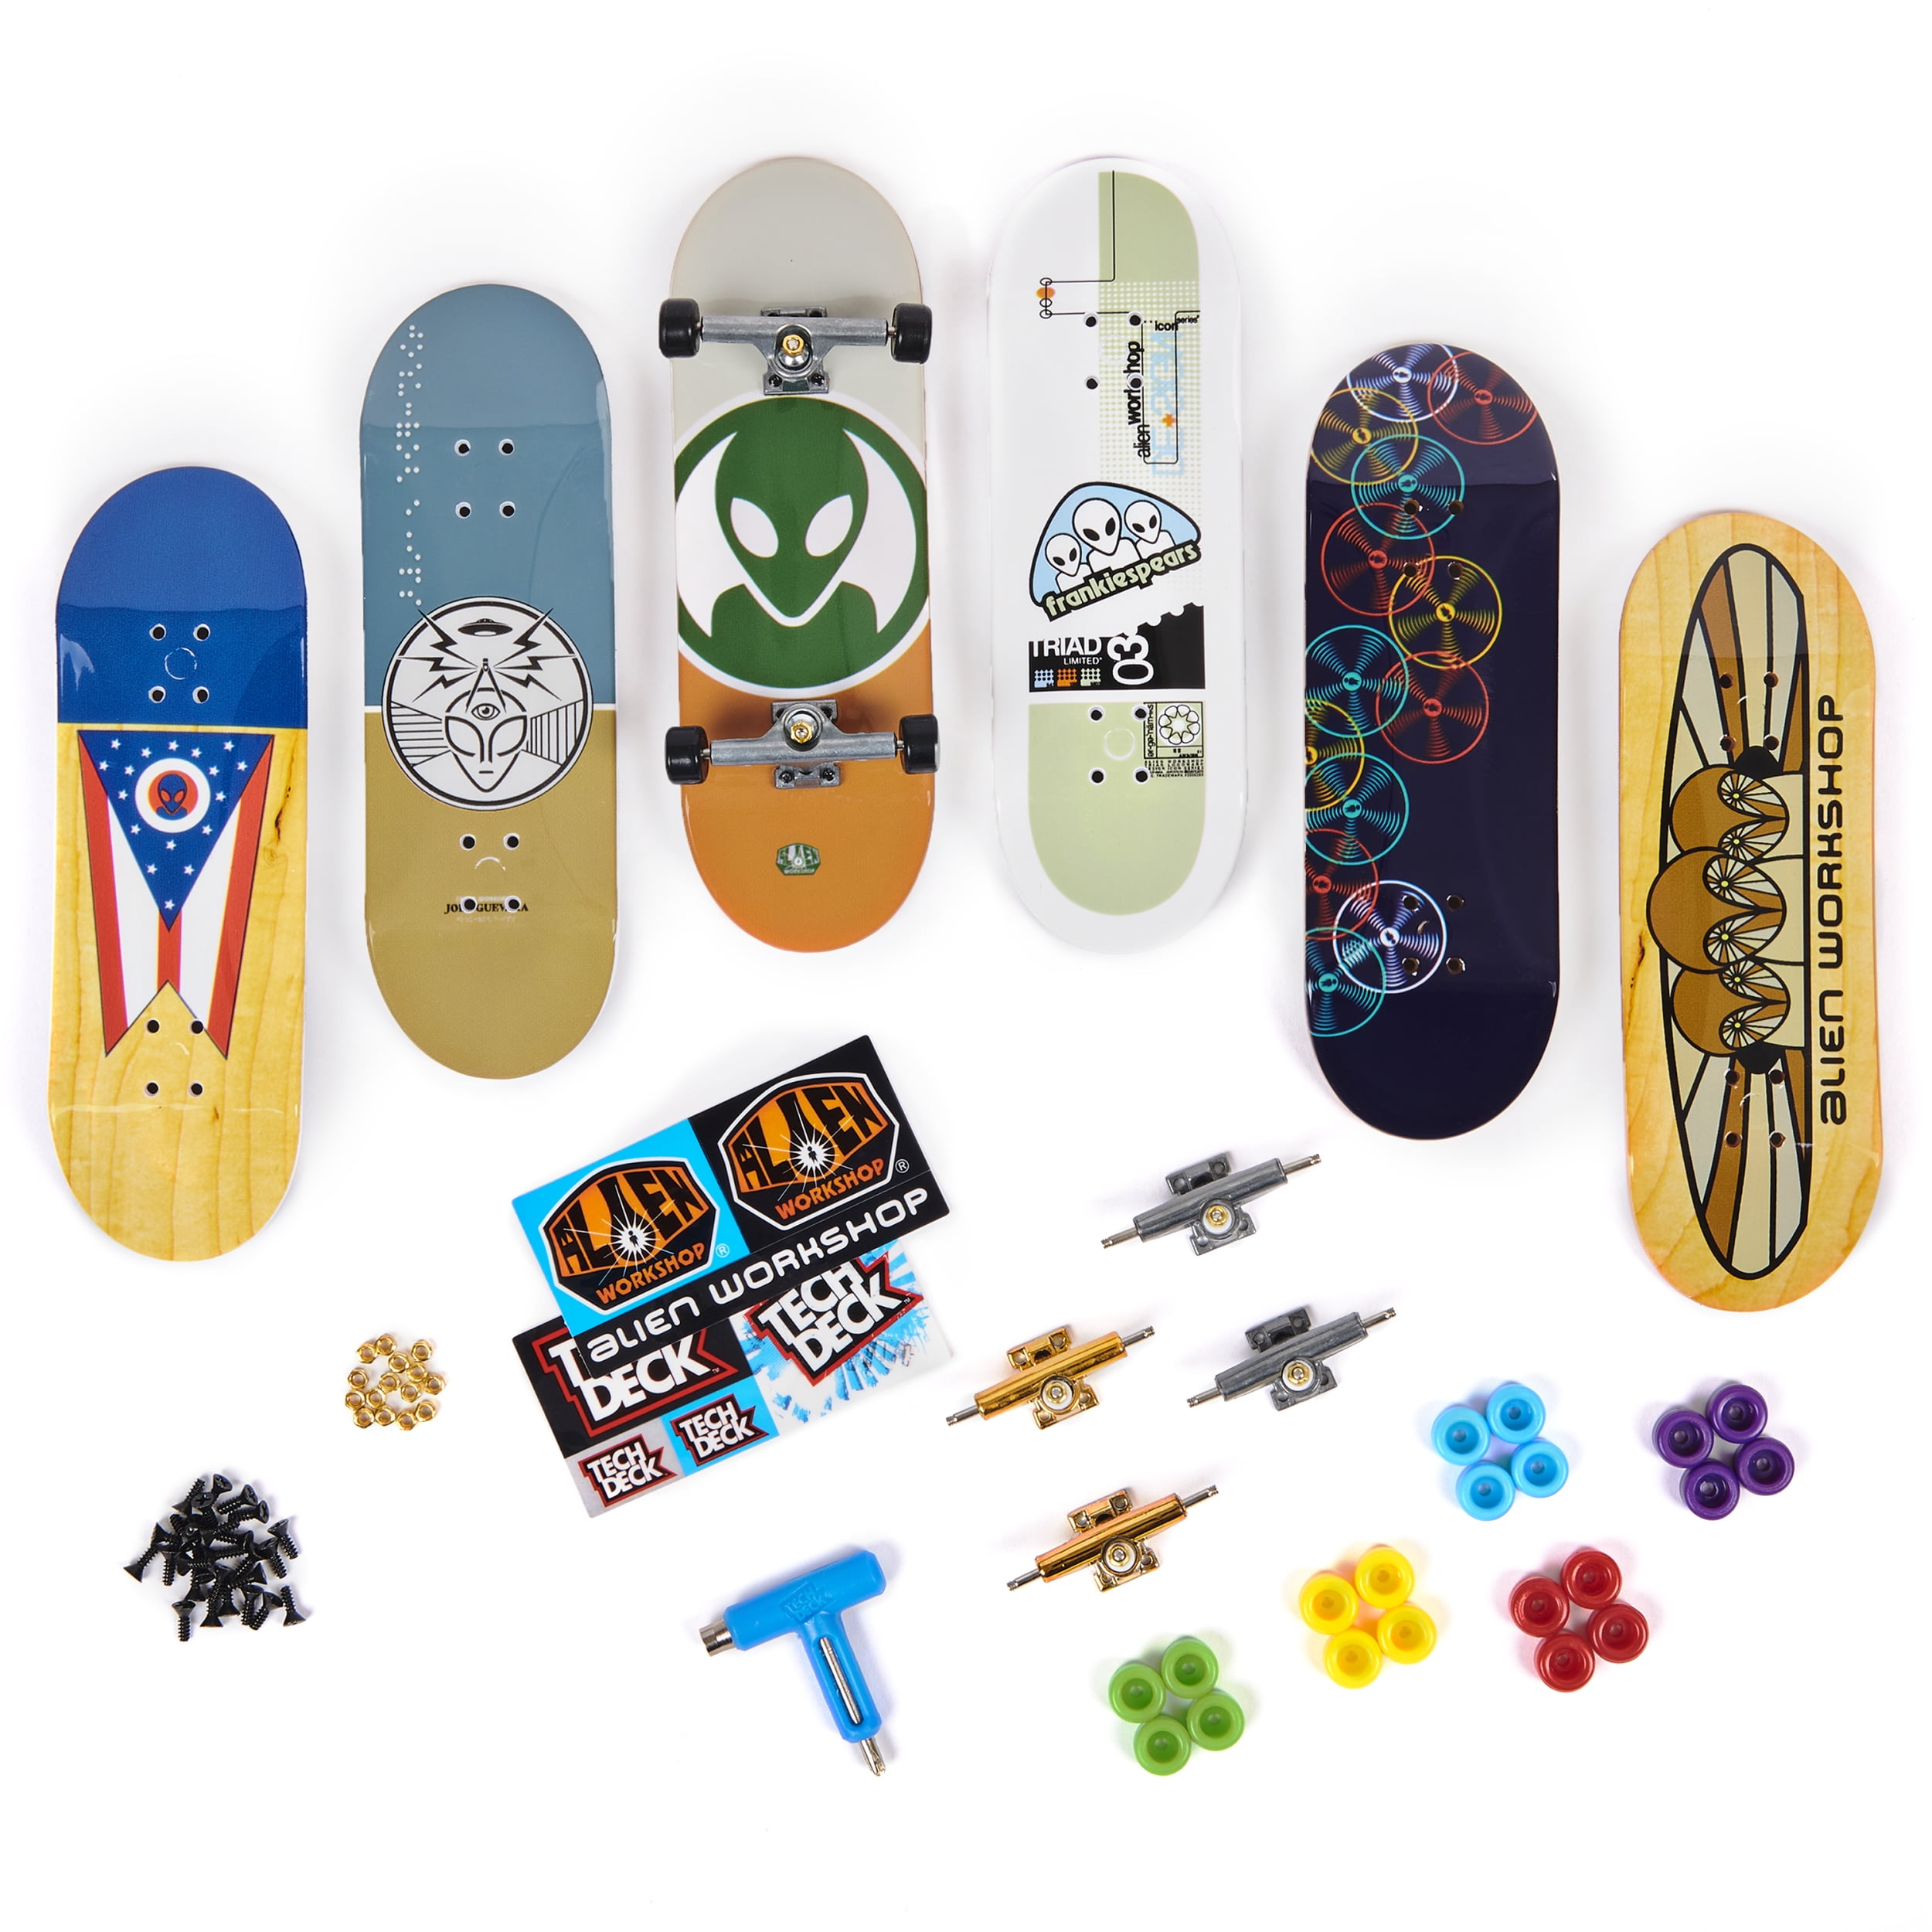 Tech Deck Sk8shop Fingerboard Bonus Pack Collectible and Customizable Mini Skateboards for sale online 